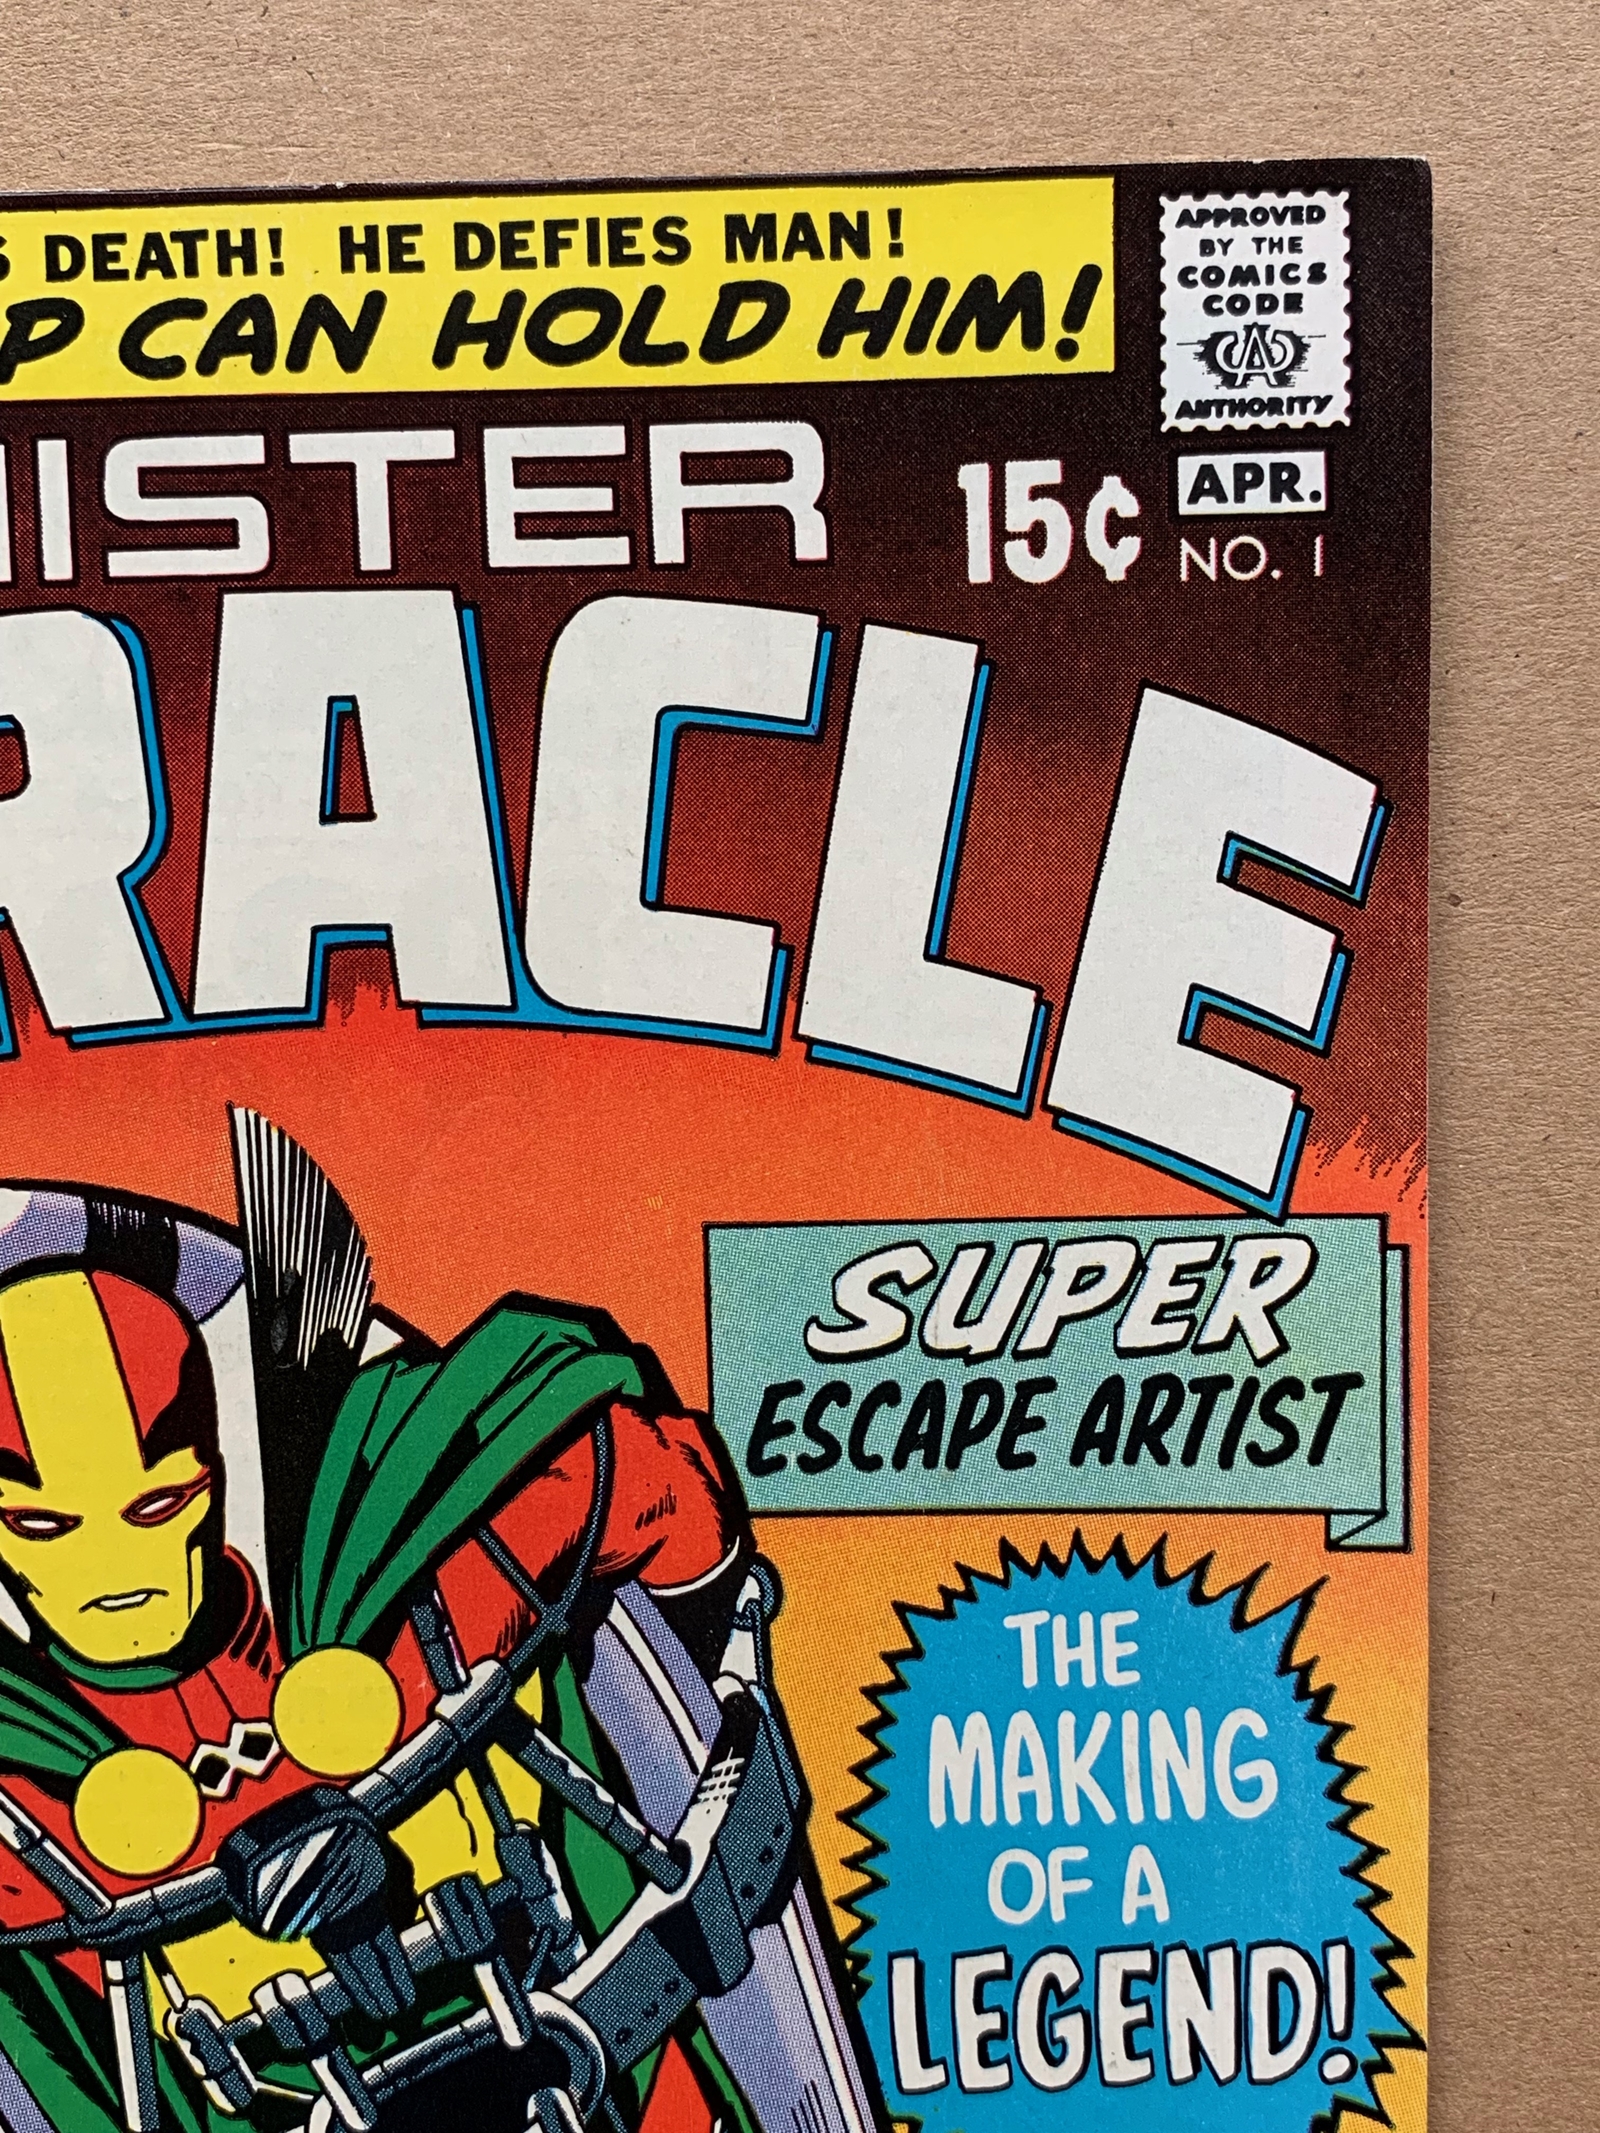 MISTER MIRACLE #1 (1971 - DC) VG/FN (Cents Copy) - First appearances of Mister Miracle and Oberon. - Image 4 of 10